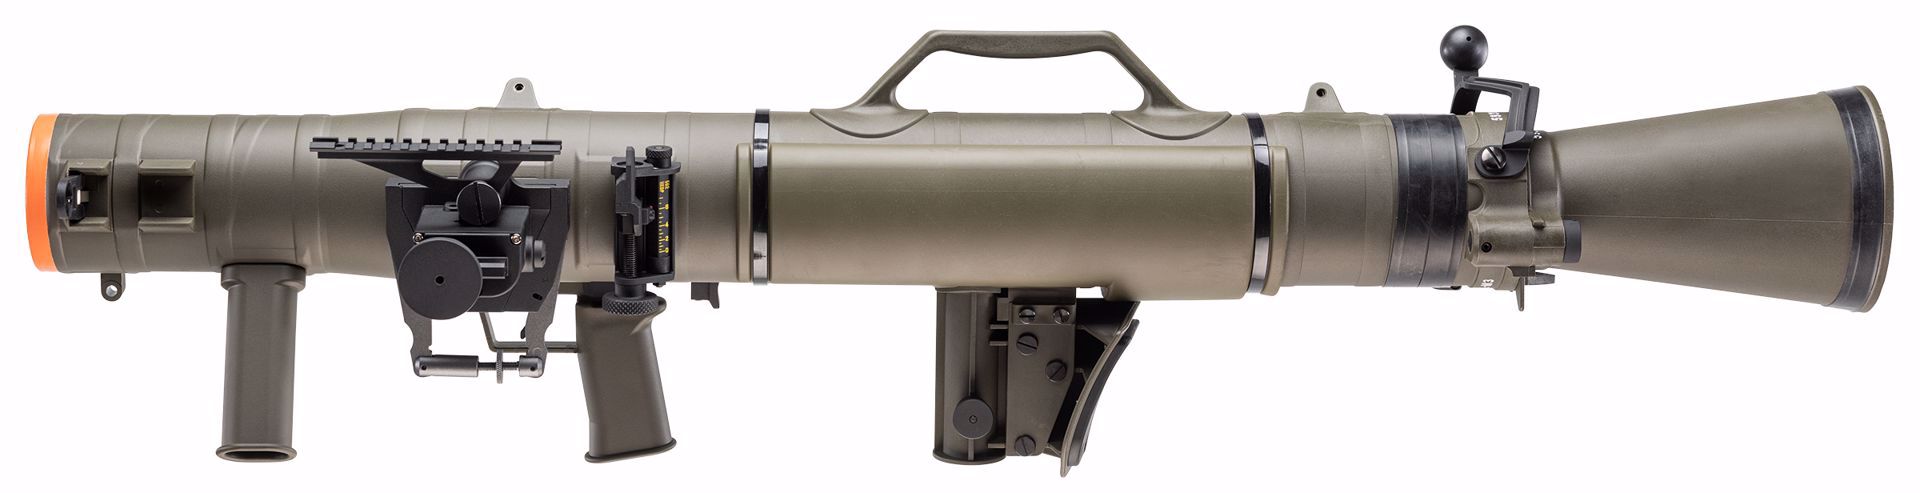 ELITE FORCE USA, UMAREX USA Elite Force M3 MAAWS CARL GUSTAF Gas Airsoft Grenade Launcher